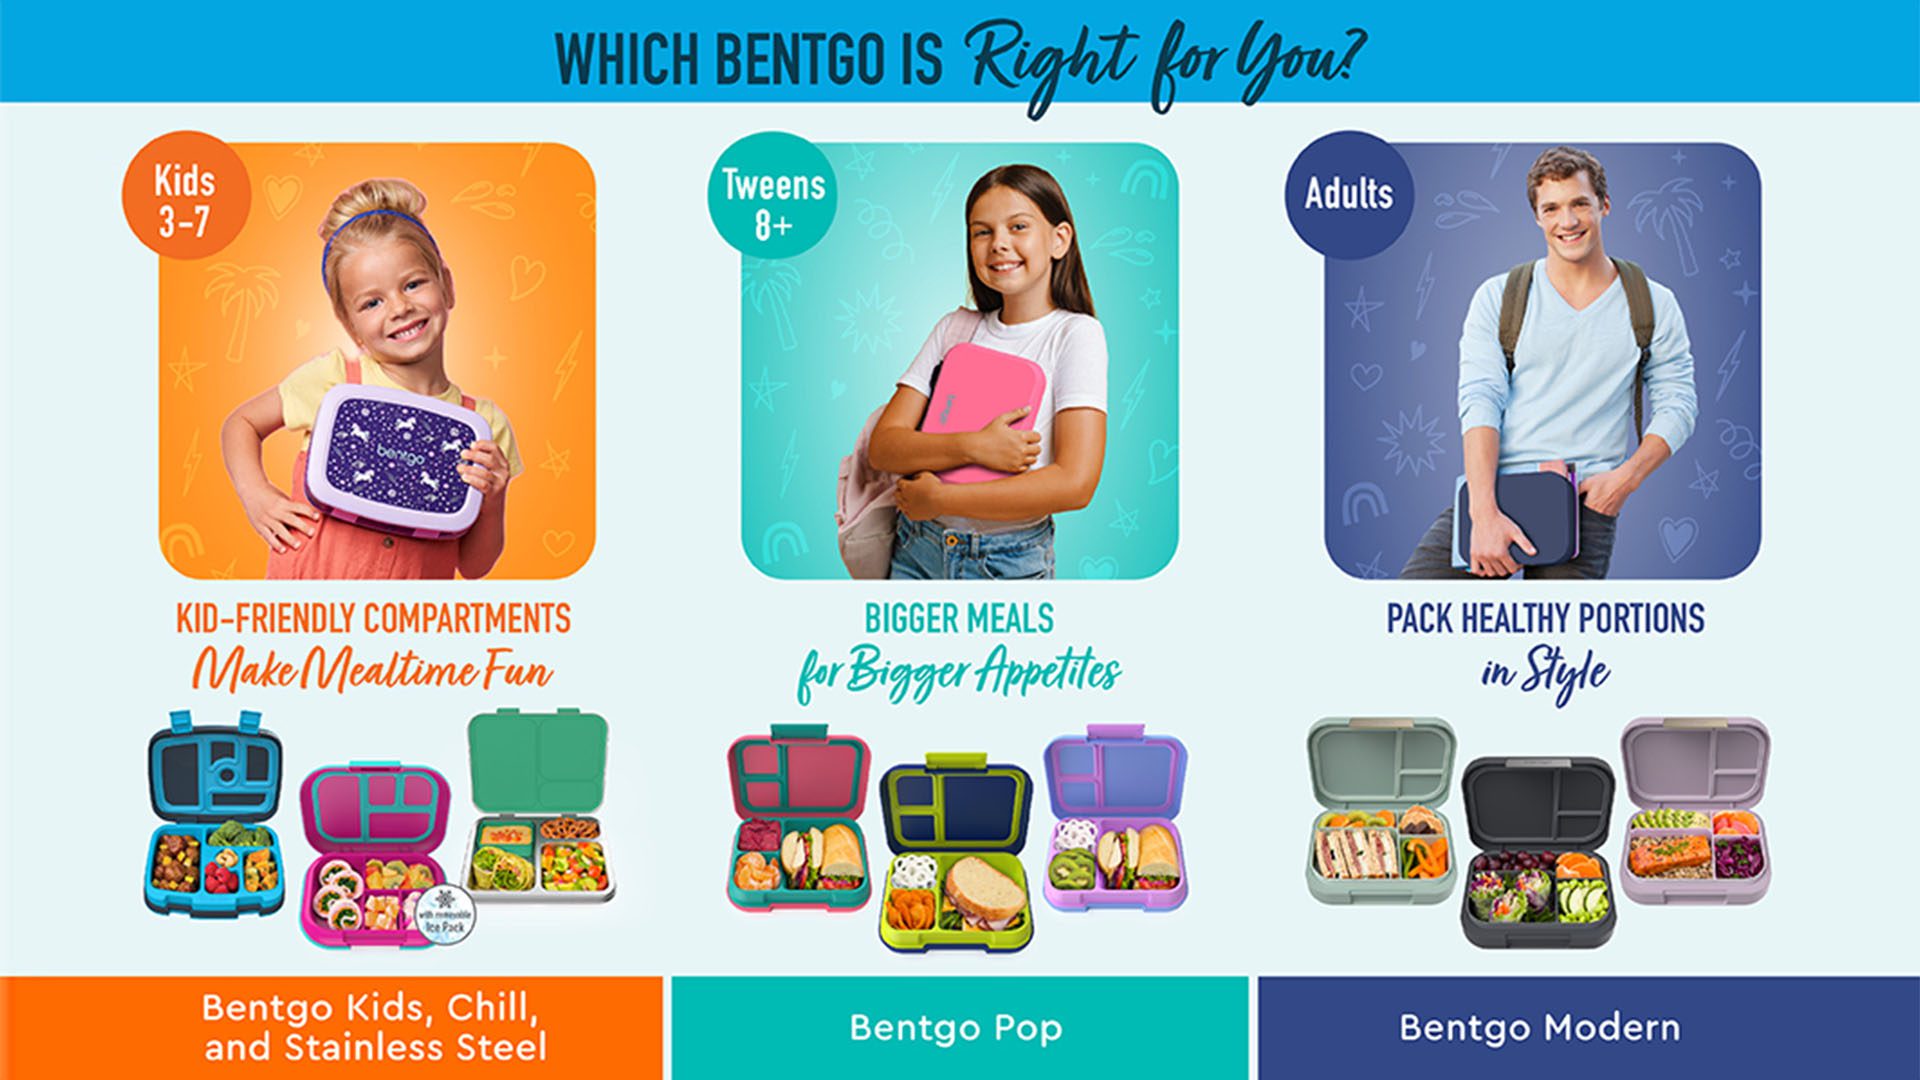 5. Bentgo Lunch Boxes back to school products